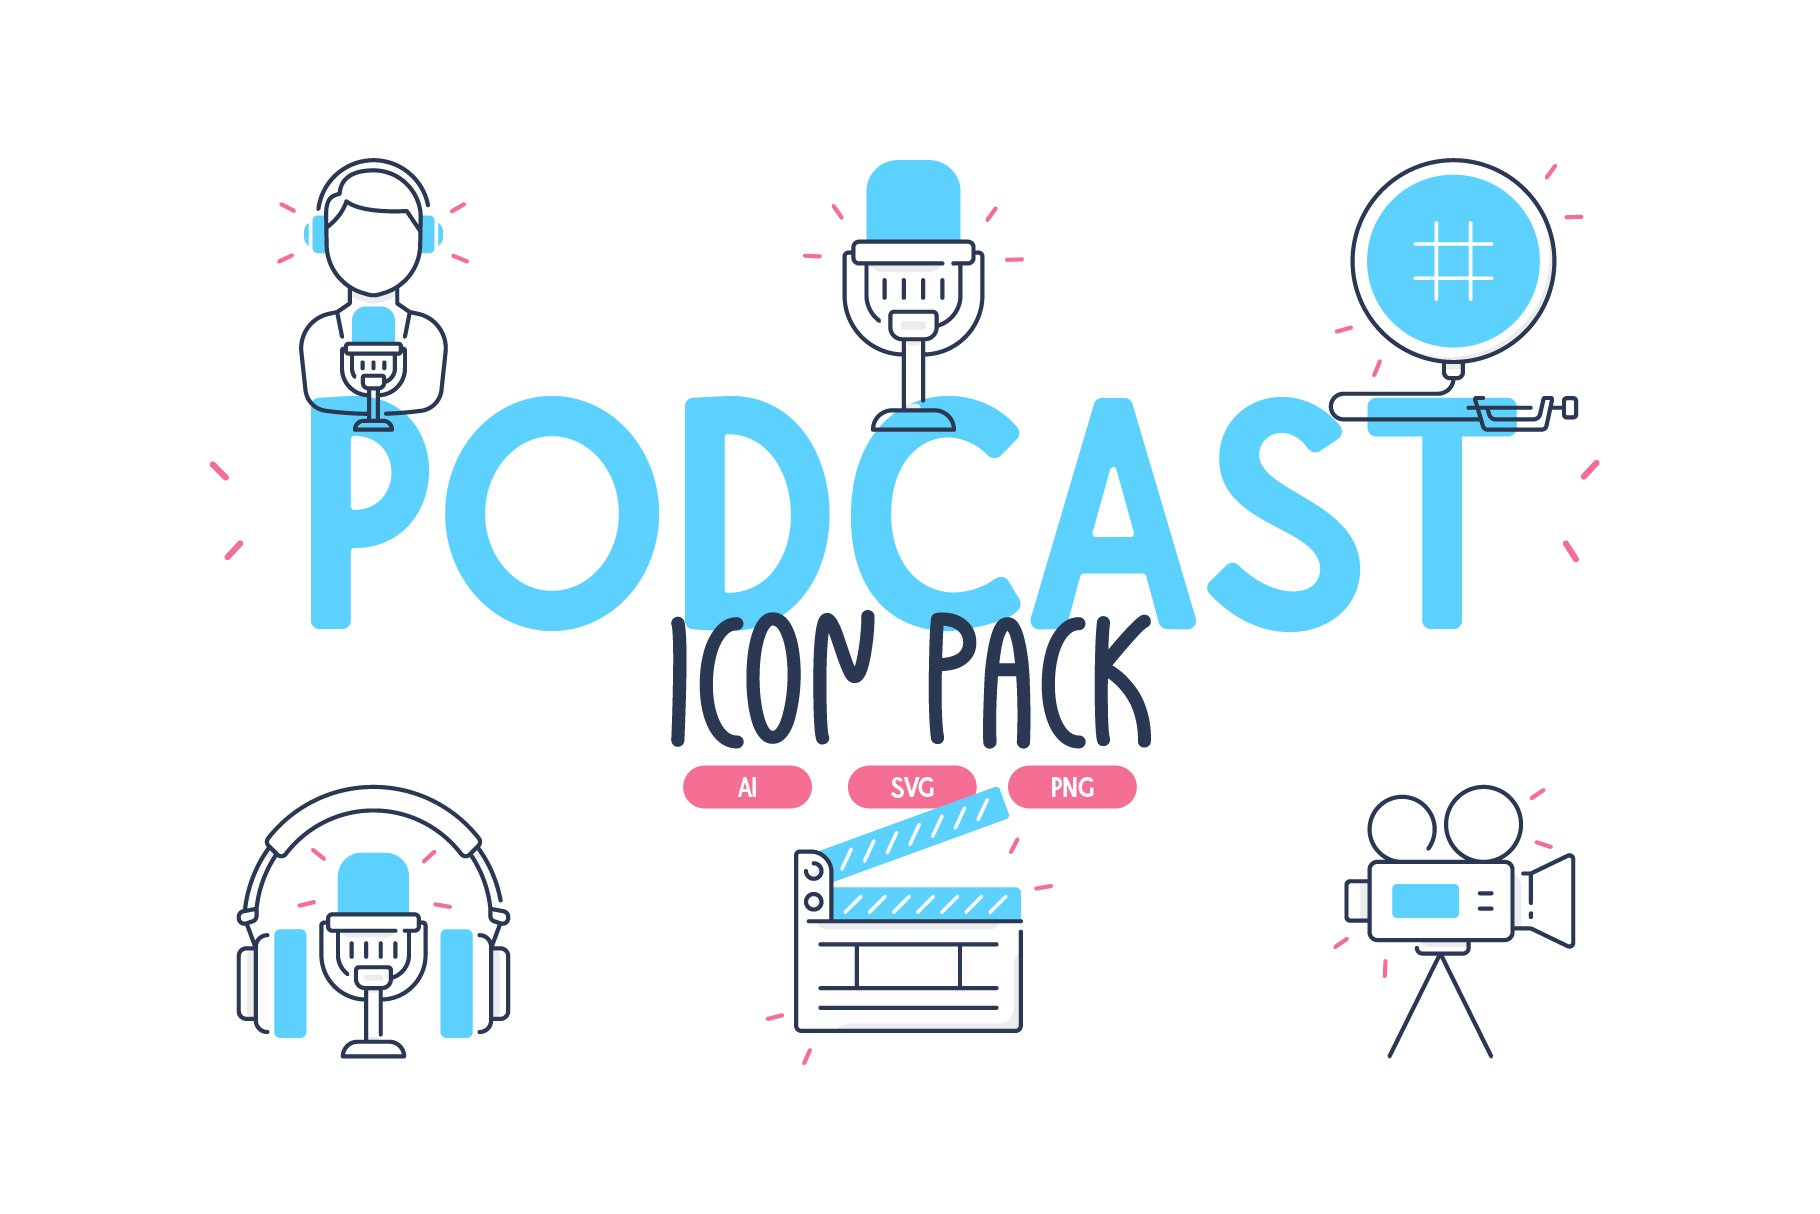 Podcast Icons cover image.